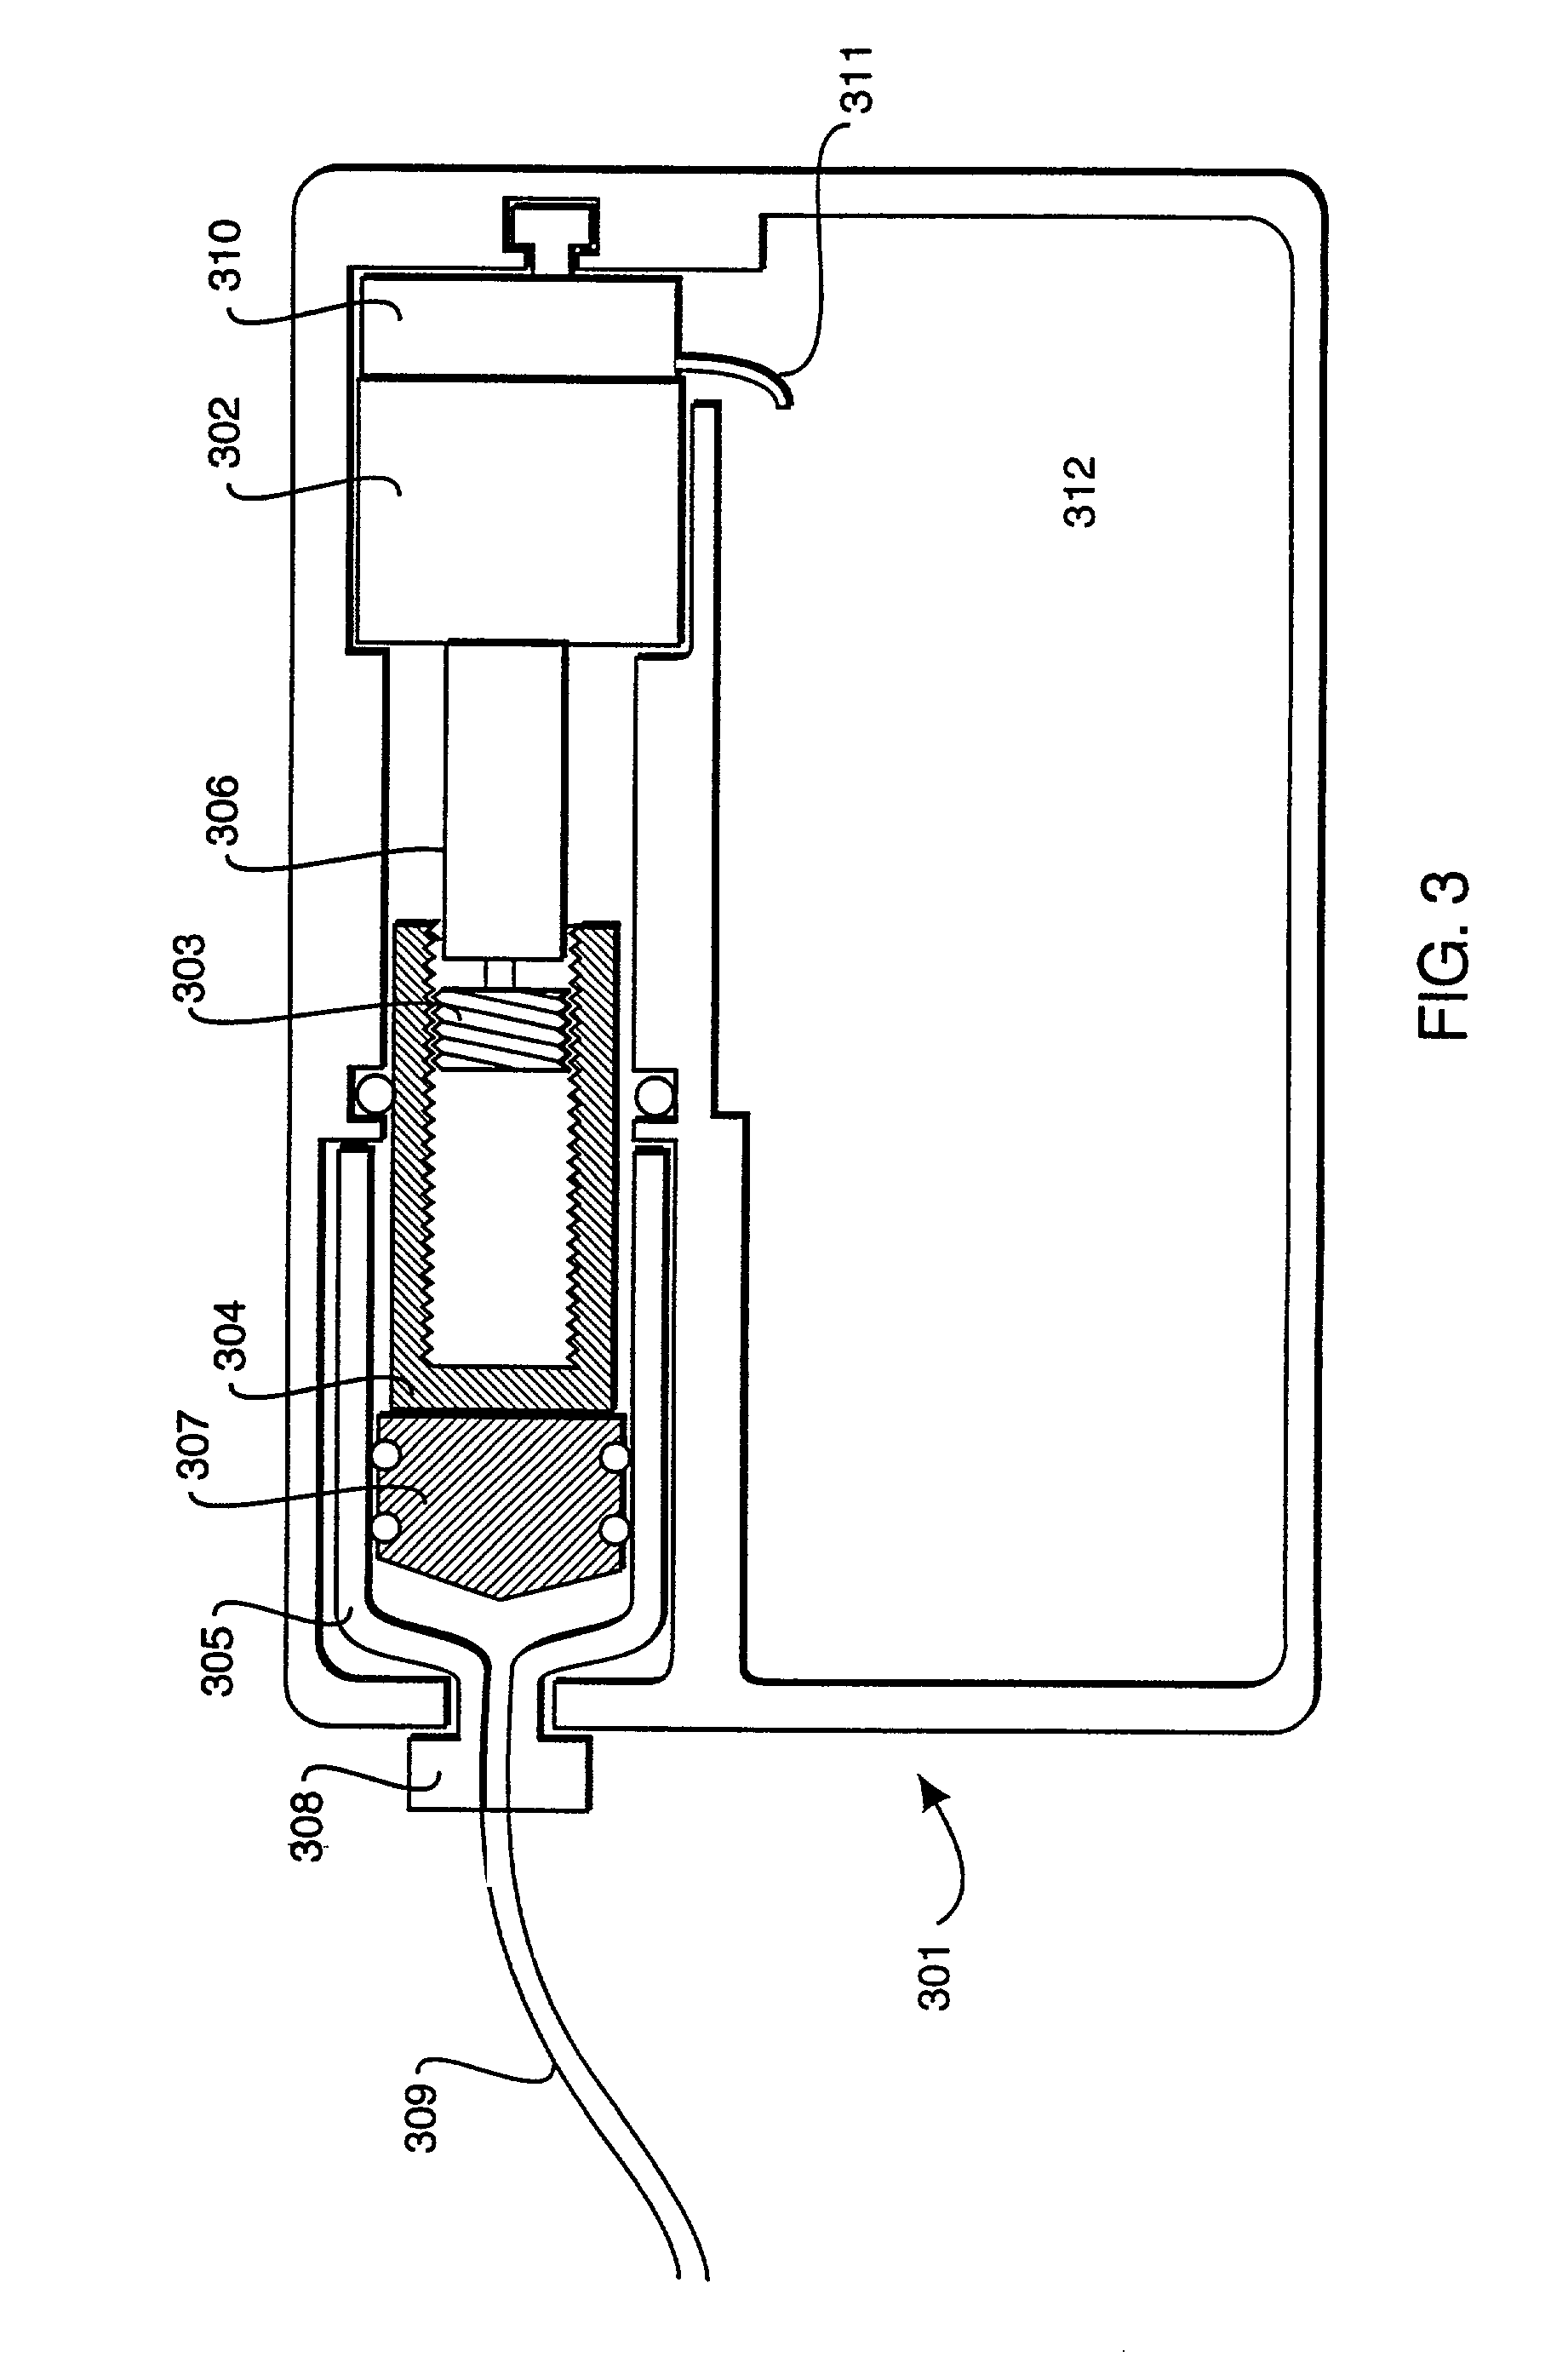 Method and apparatus for detection of occlusions